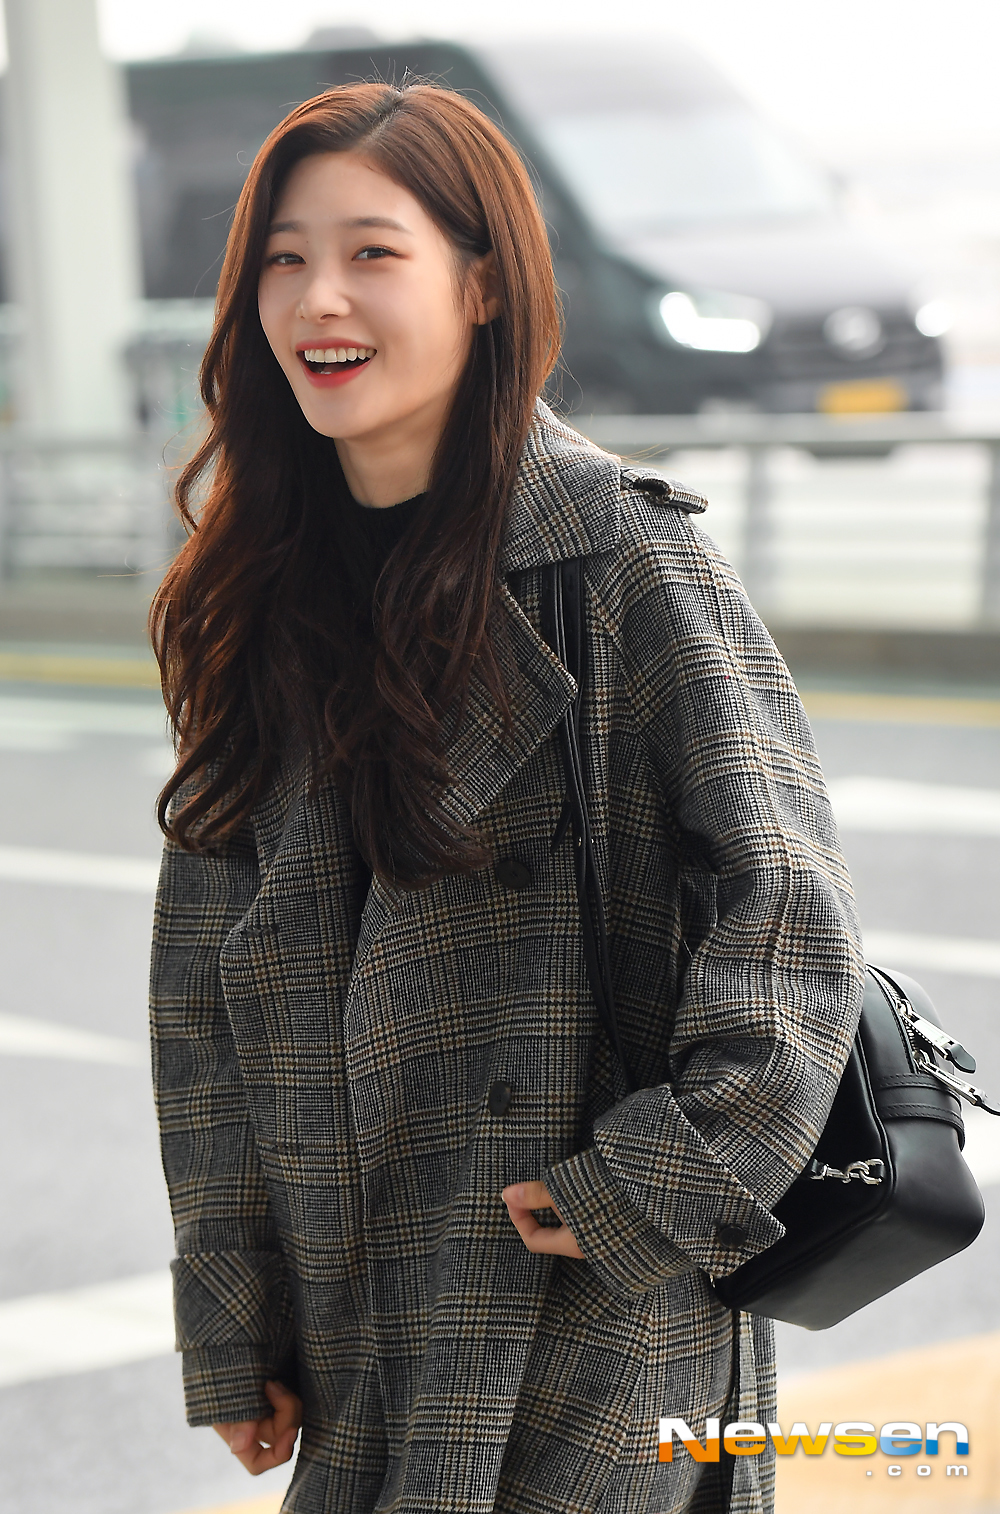 DIA Jung Chae-yeon departed via the ICN airport 2nd Terminer on the morning of November 7th, showing the Airport FashionJung Chae-yeon is heading to the departure hall on the day.Jung Chae-yeon left for the event in Singapore.expressiveness